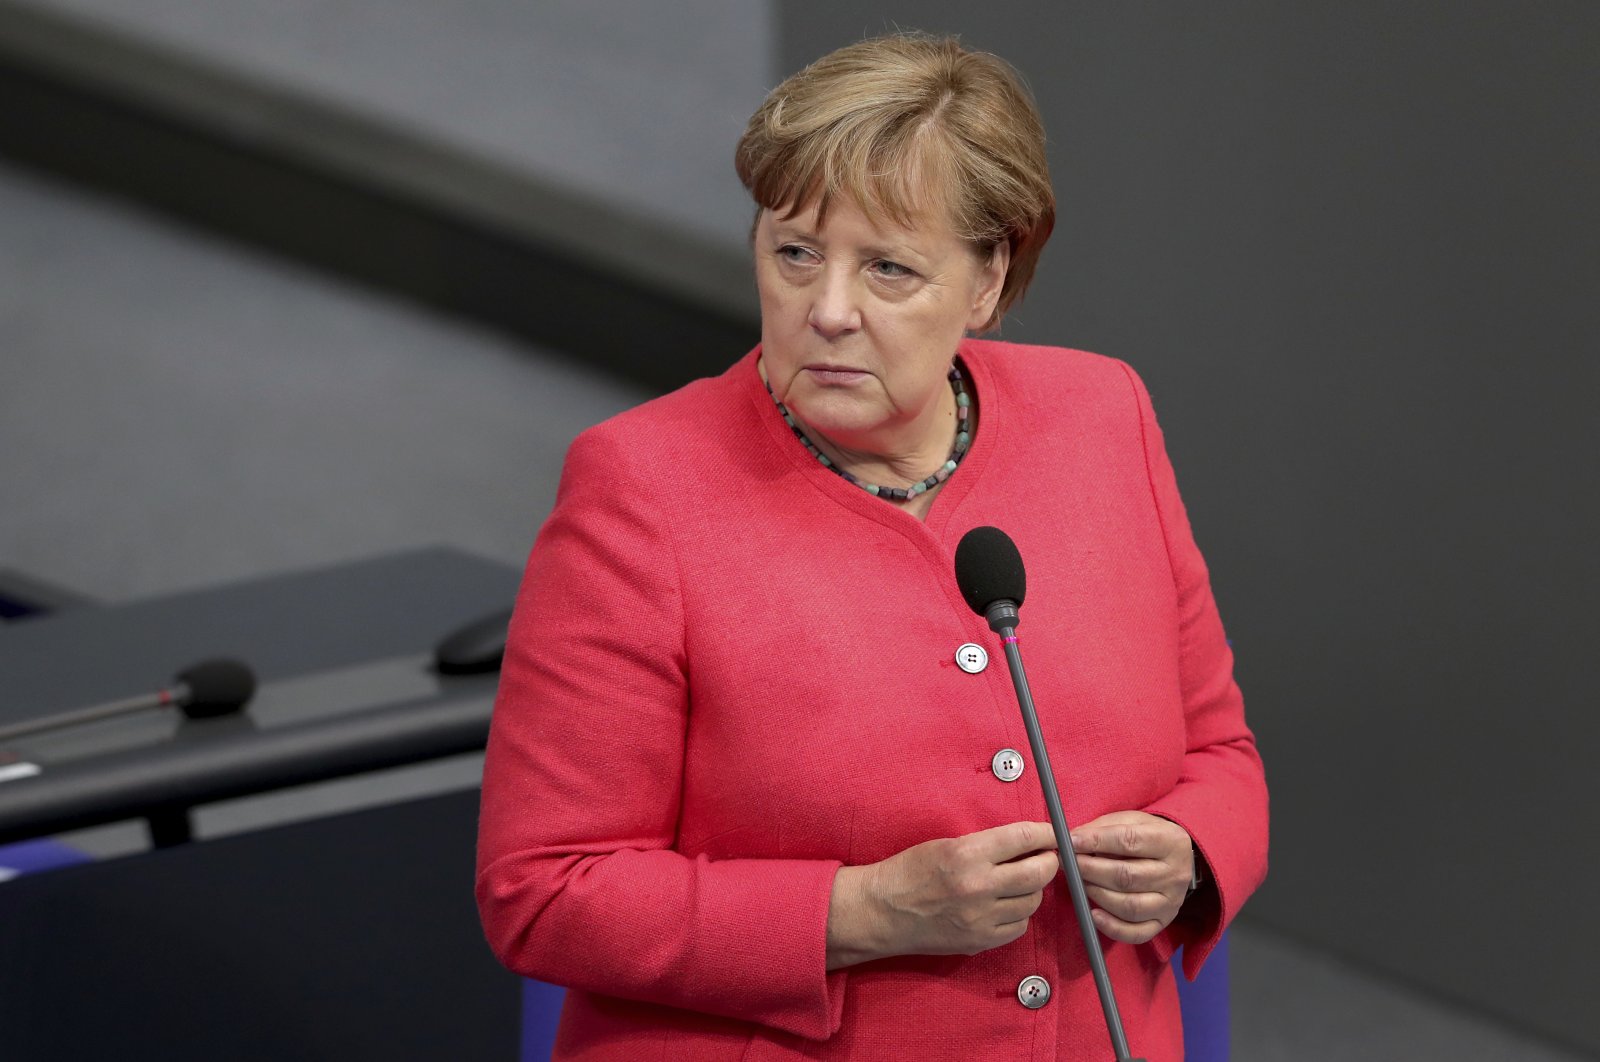 German Chancellor Angela Merkel takes questions from a deputy of the far-right Alternative for Germany party during a meeting of the German federal parliament, the Bundestag, at the Reichstag building, Berlin, Germany, July 1, 2020. (AP Photo)